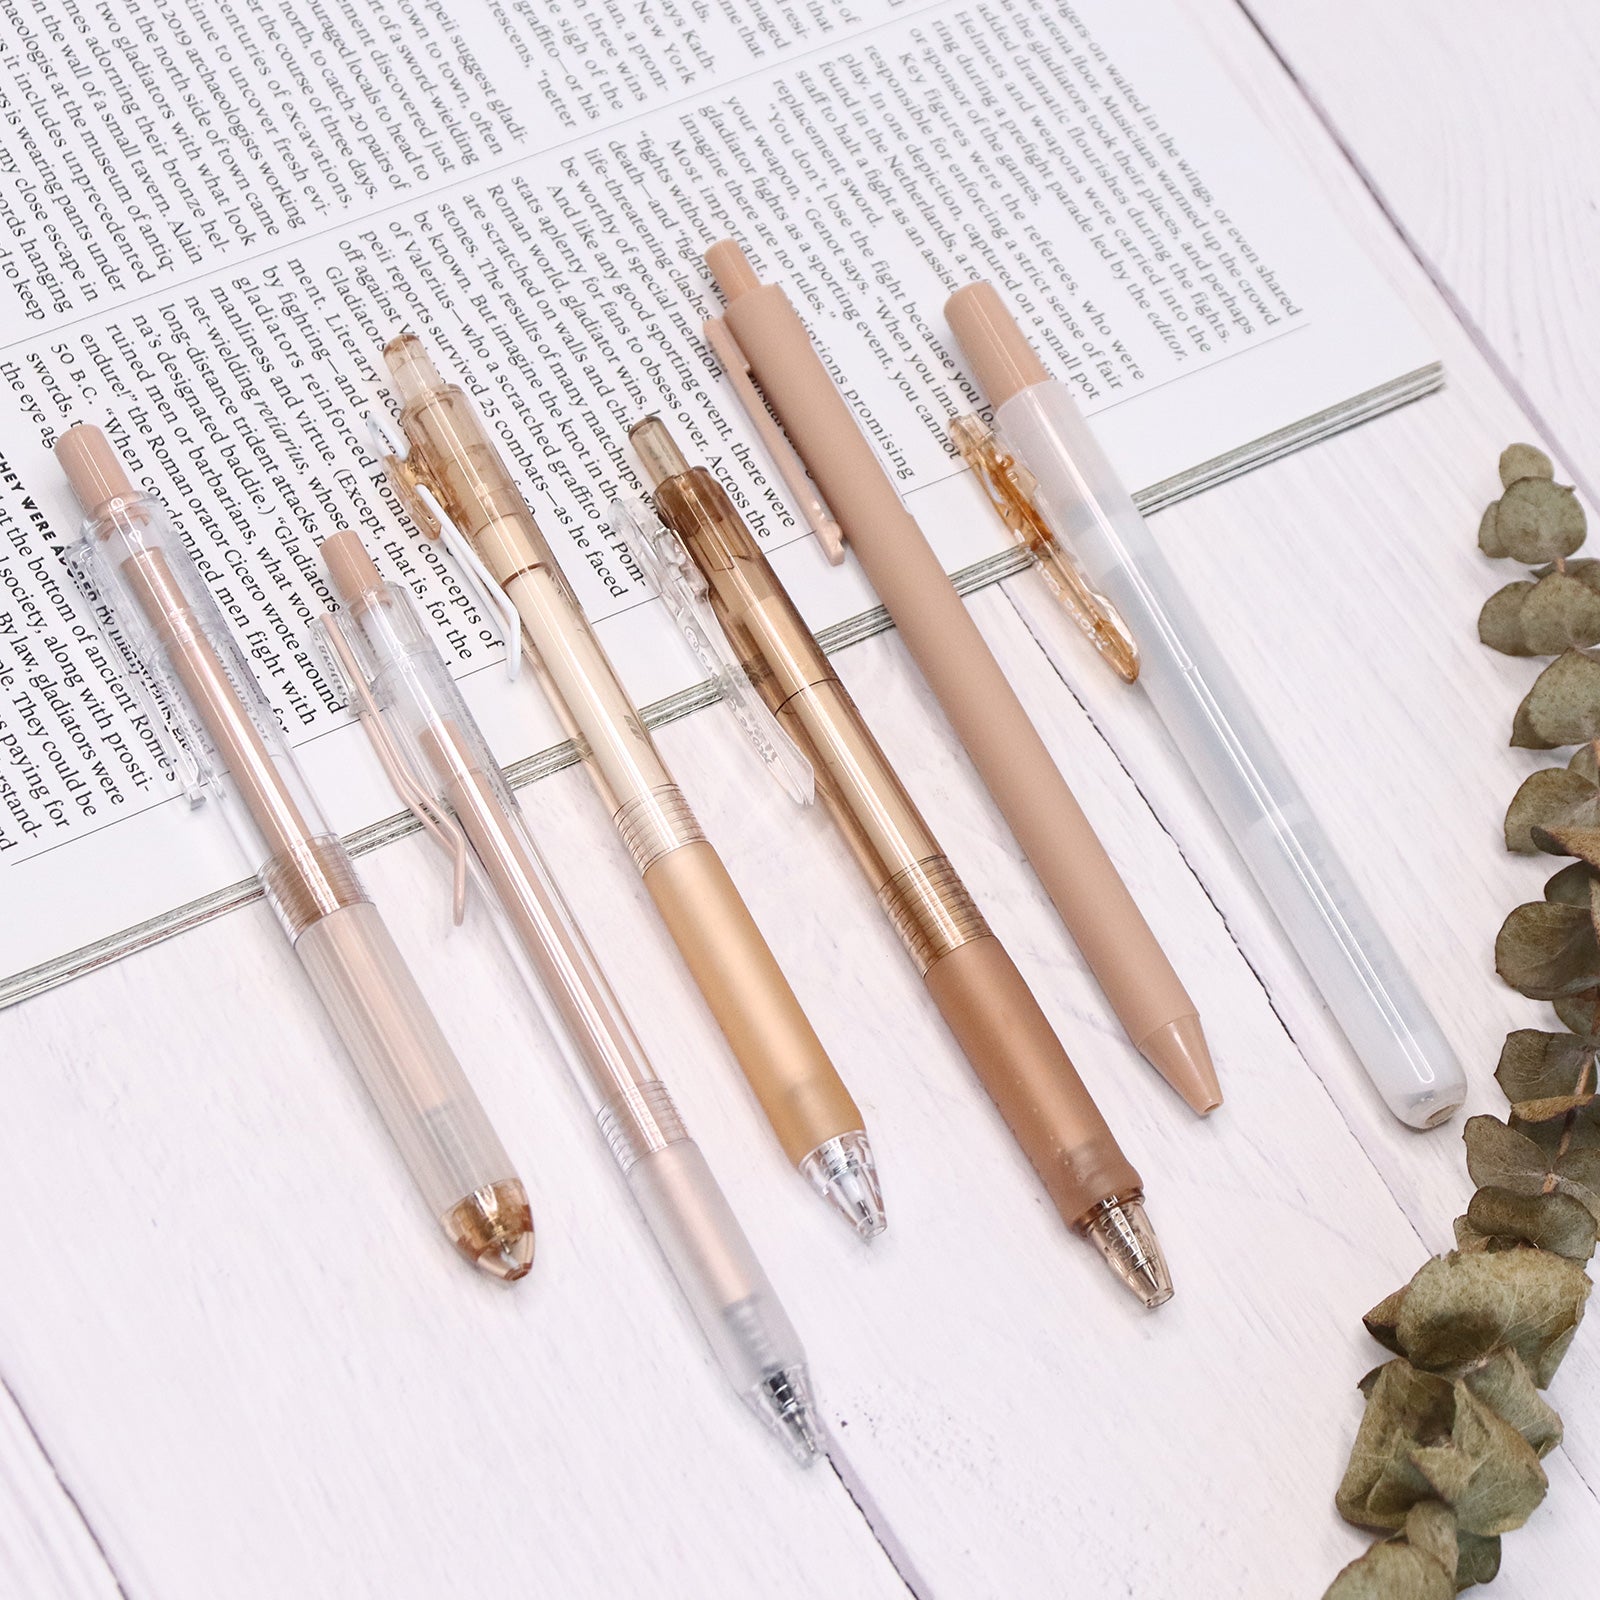 muji pen products for sale